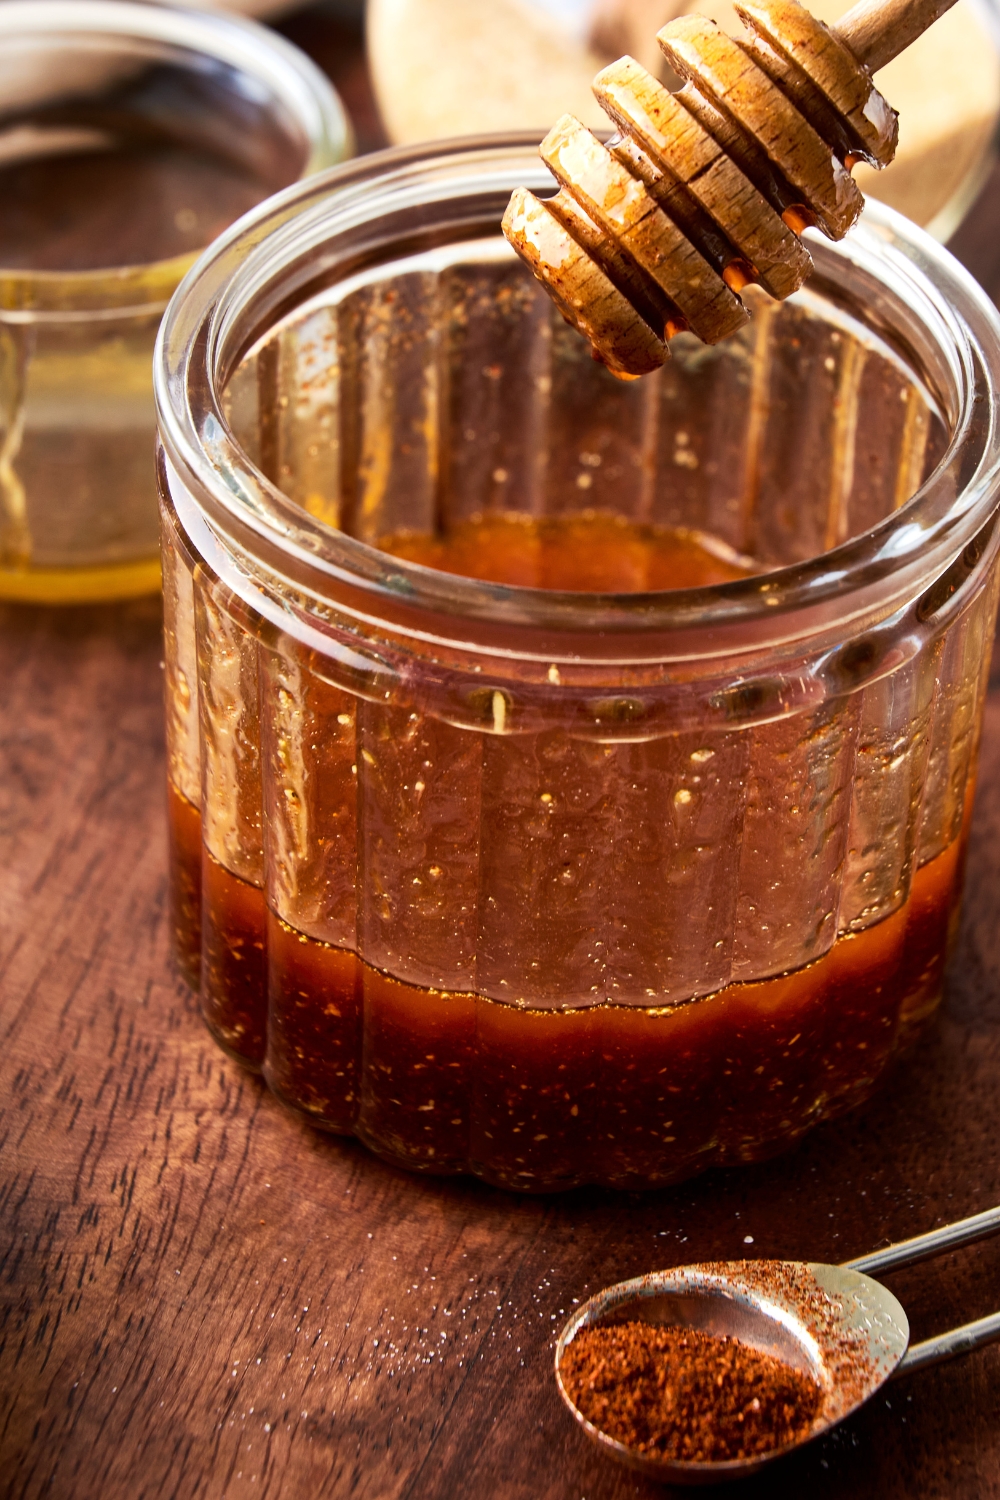 A honey dipper is held above a glass jar of hot honey.